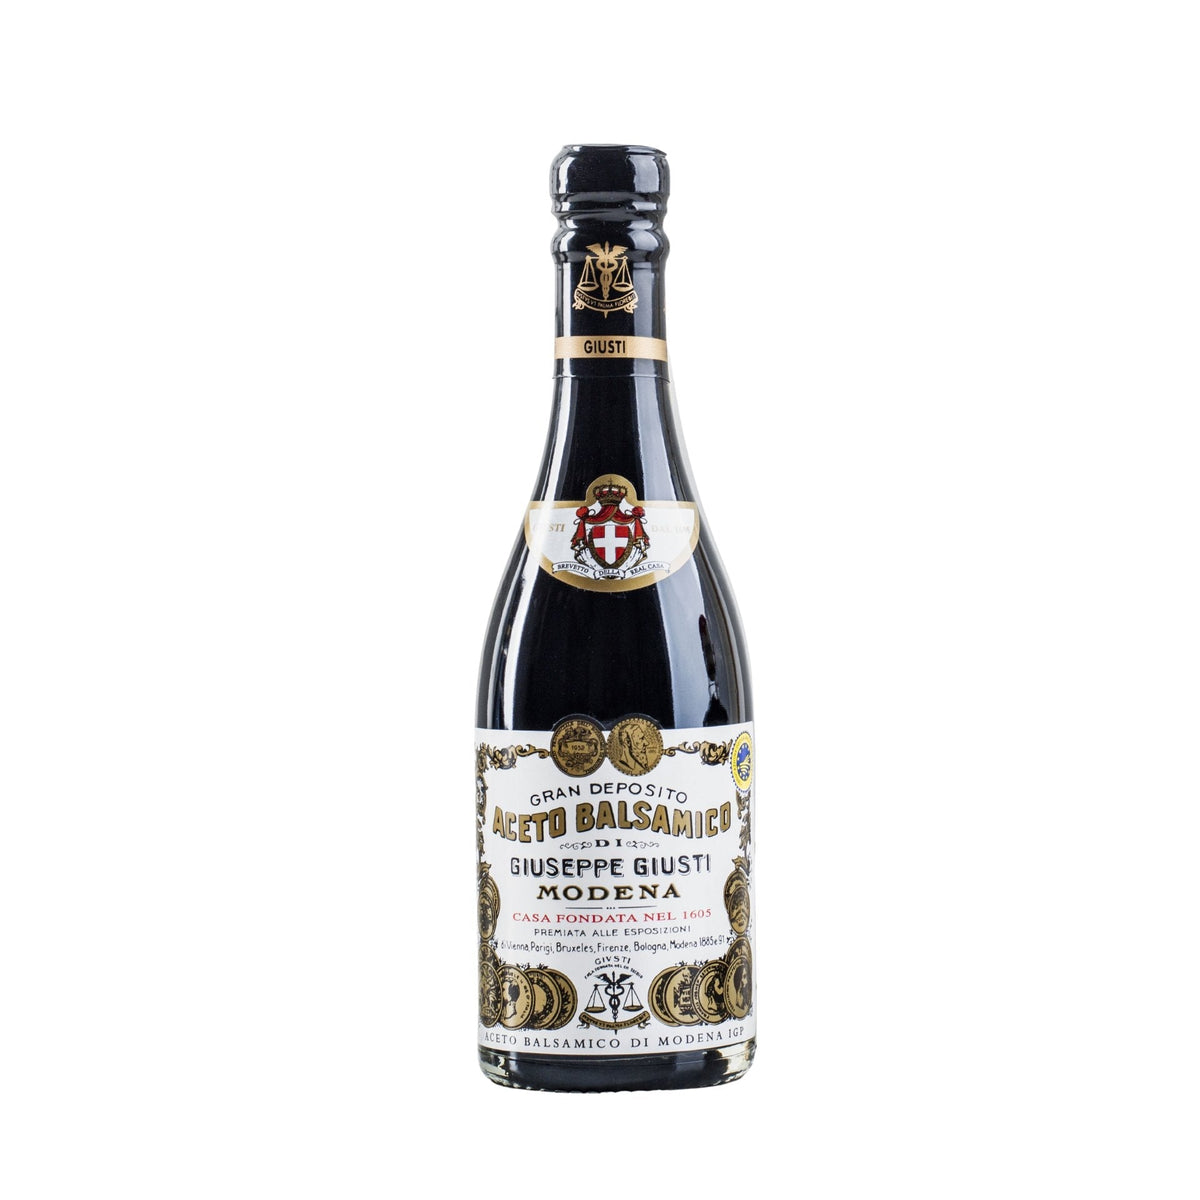 Acetaia Giusti 2 Gold Medals &#39;Il Classico&#39; Champagnotta 250ml (8 years) Balsamic Vinegar of Modena IGP  | Imported and distributed in the UK by Just Gourmet Foods